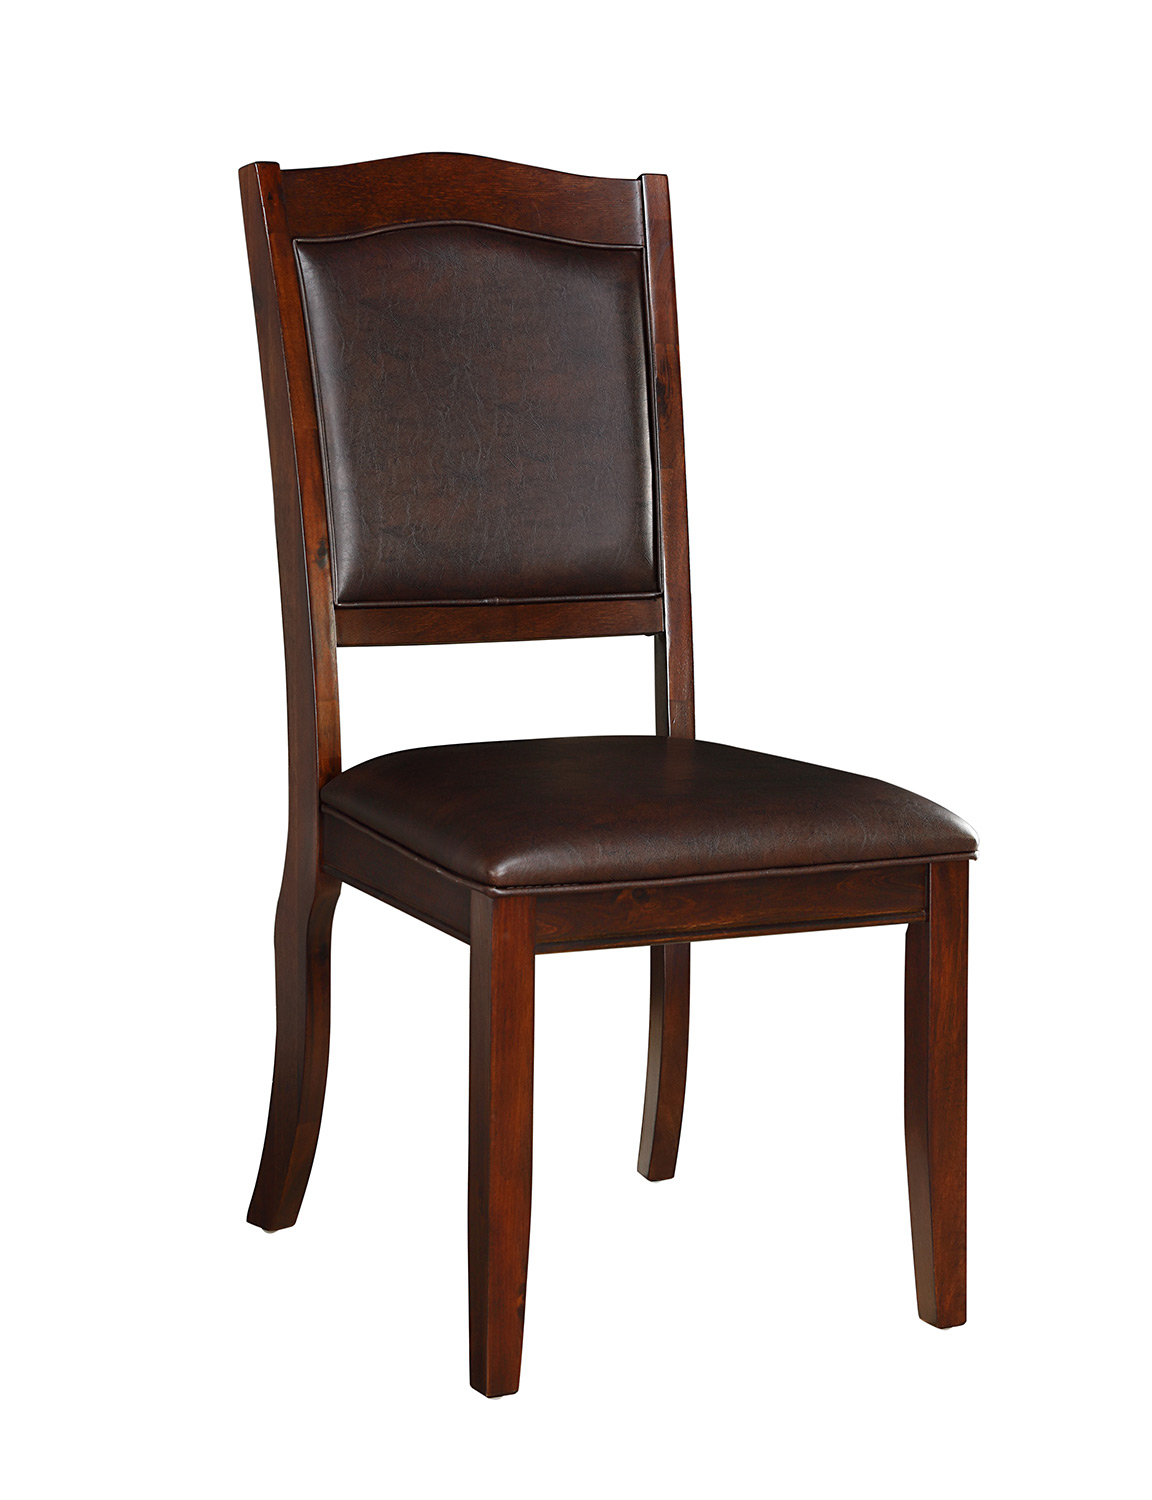 Homelegance Whitby Side Chair - Cherry